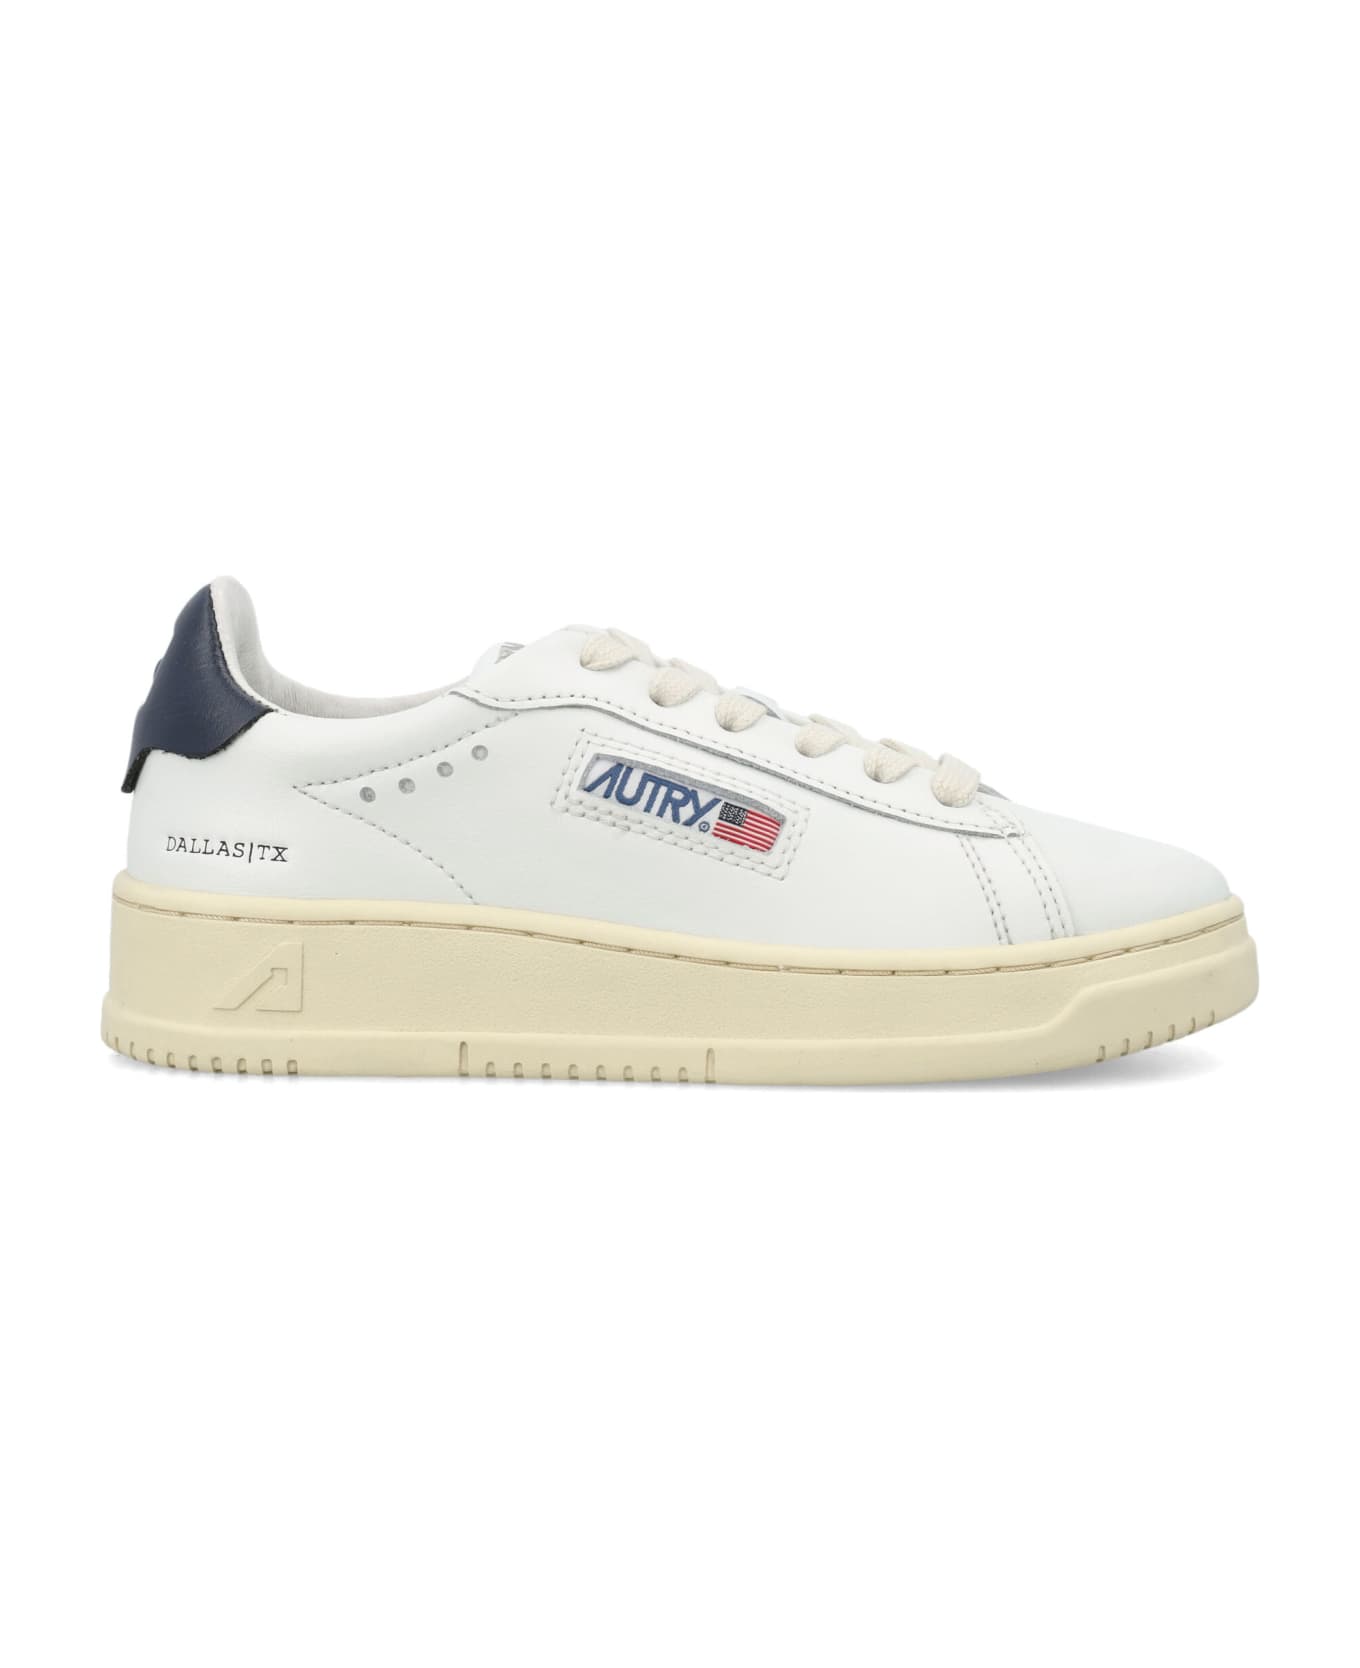 Autry Dallas Low Sneakers - WHITE/BLUE